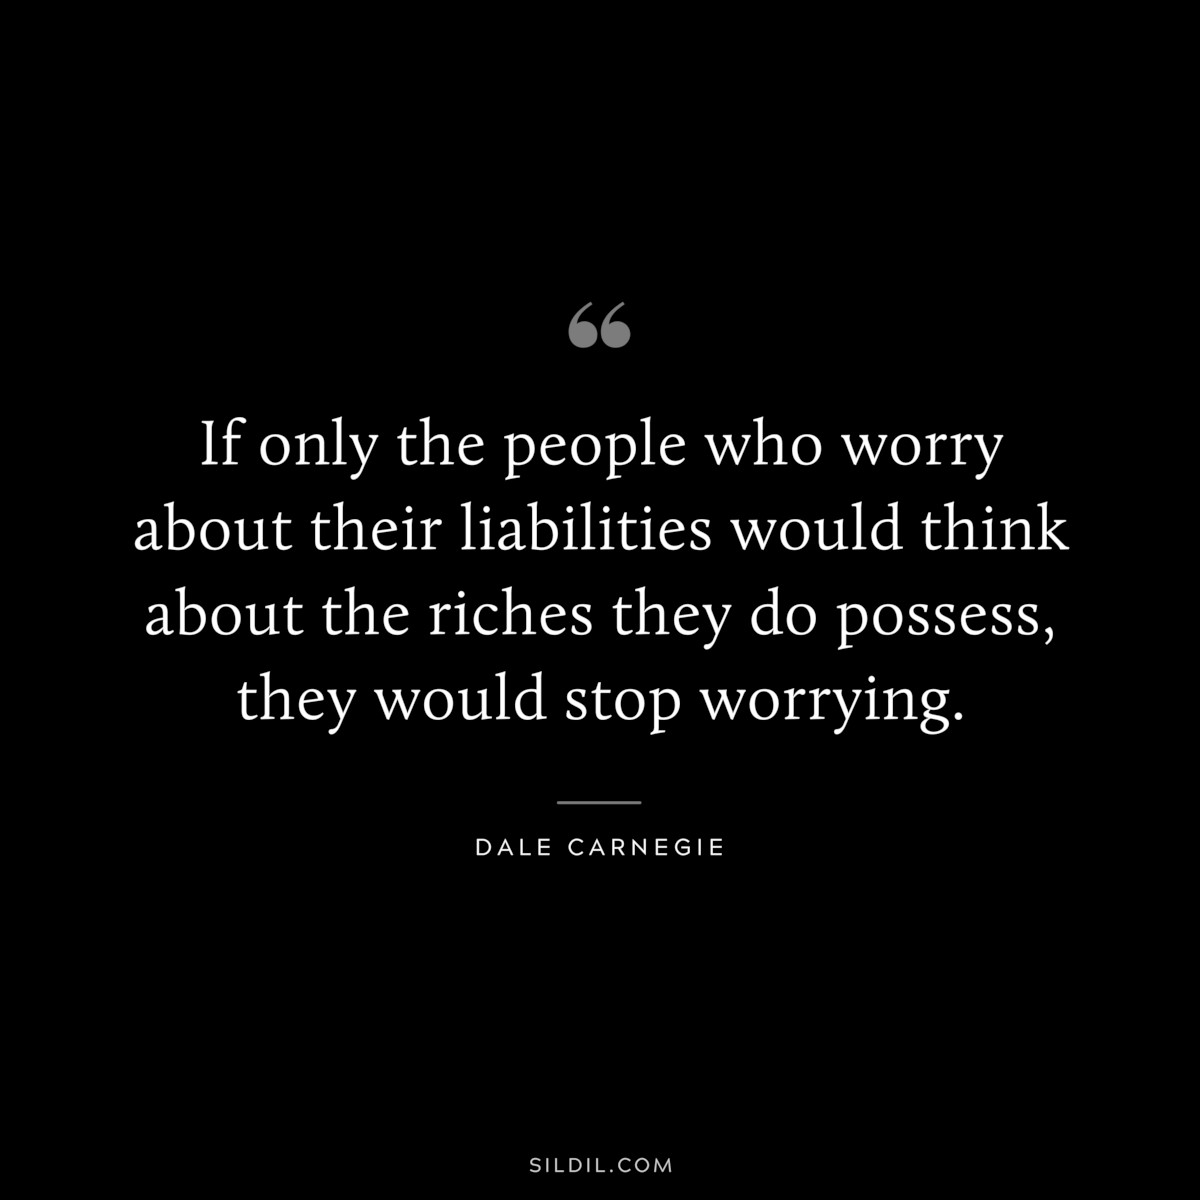 If only the people who worry about their liabilities would think about the riches they do possess, they would stop worrying.― Dale Carnegie